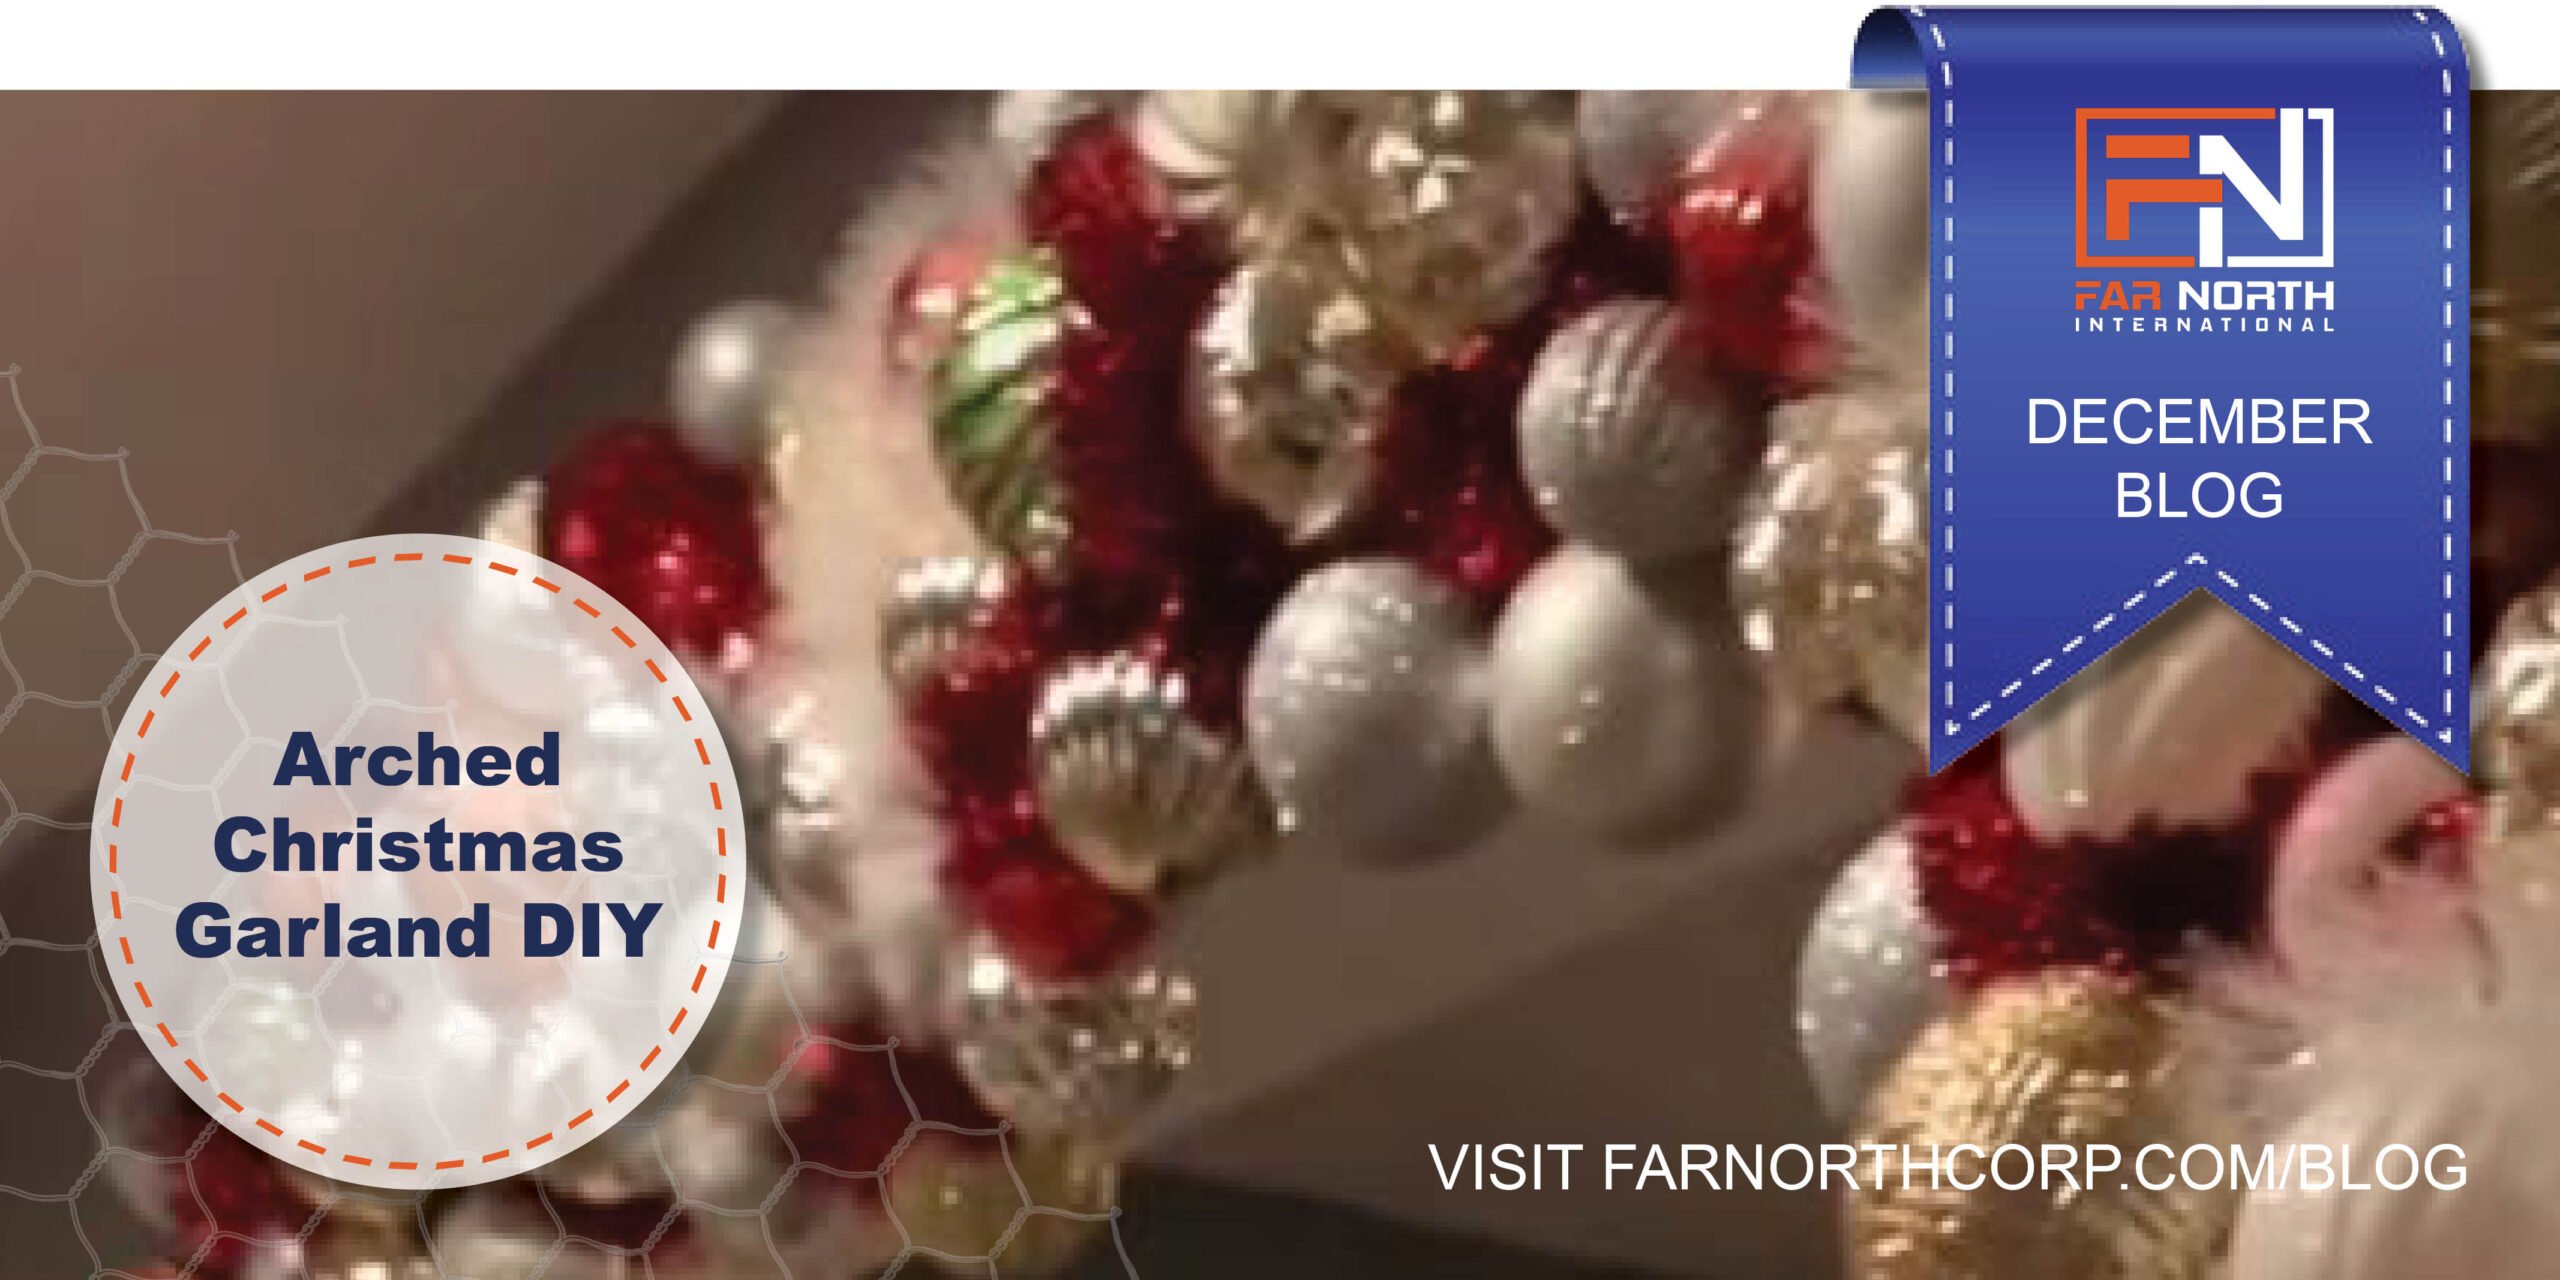 So many Christmas inspired DIY’s have been sweeping
social media, especially TikTok, like this arched ornament door frame!Posting on her TikTok account, this crafty
mom Jennie Dambrosio reveal how she makes a stunning Christmas garland using
wire mesh and adhesive hooks!Jennie starts by sticking several adhesive
hooks around the doorframe (this can be done indoors and outdoors). She then
hooked [...]